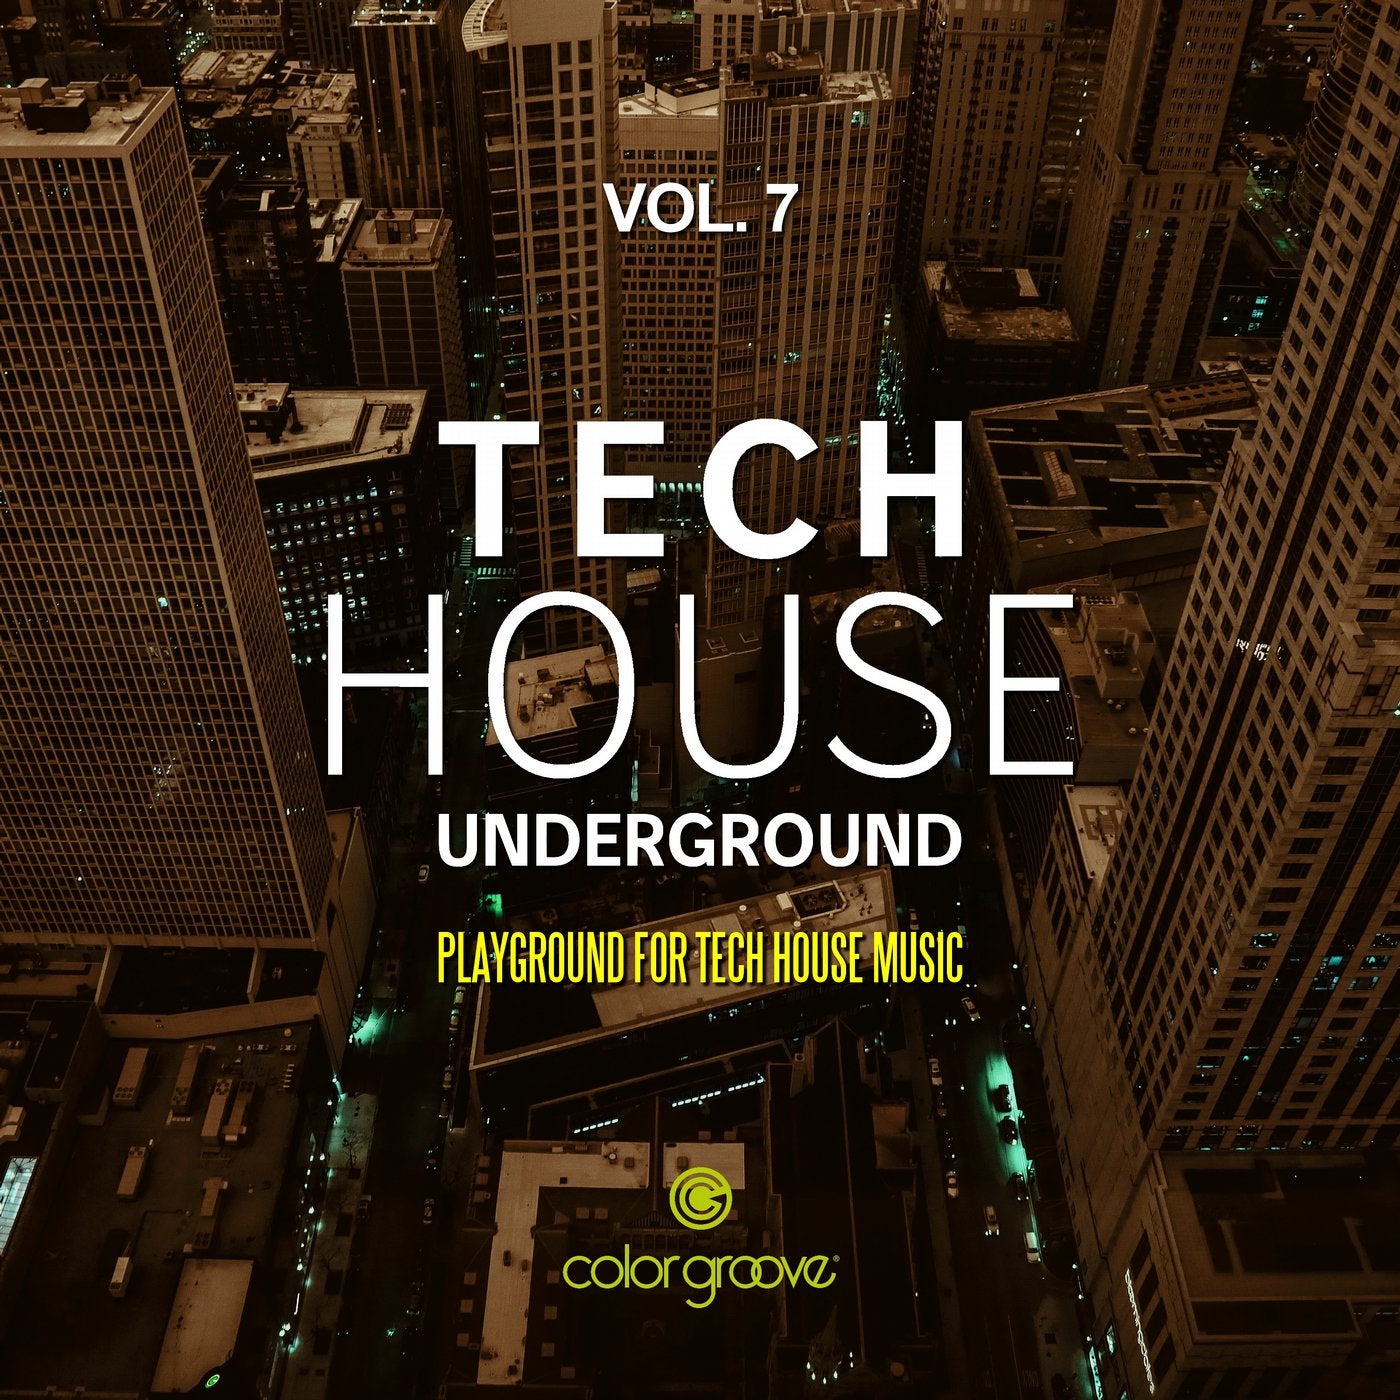 Tech House Underground, Vol. 7 (Playground For Tech House Music)